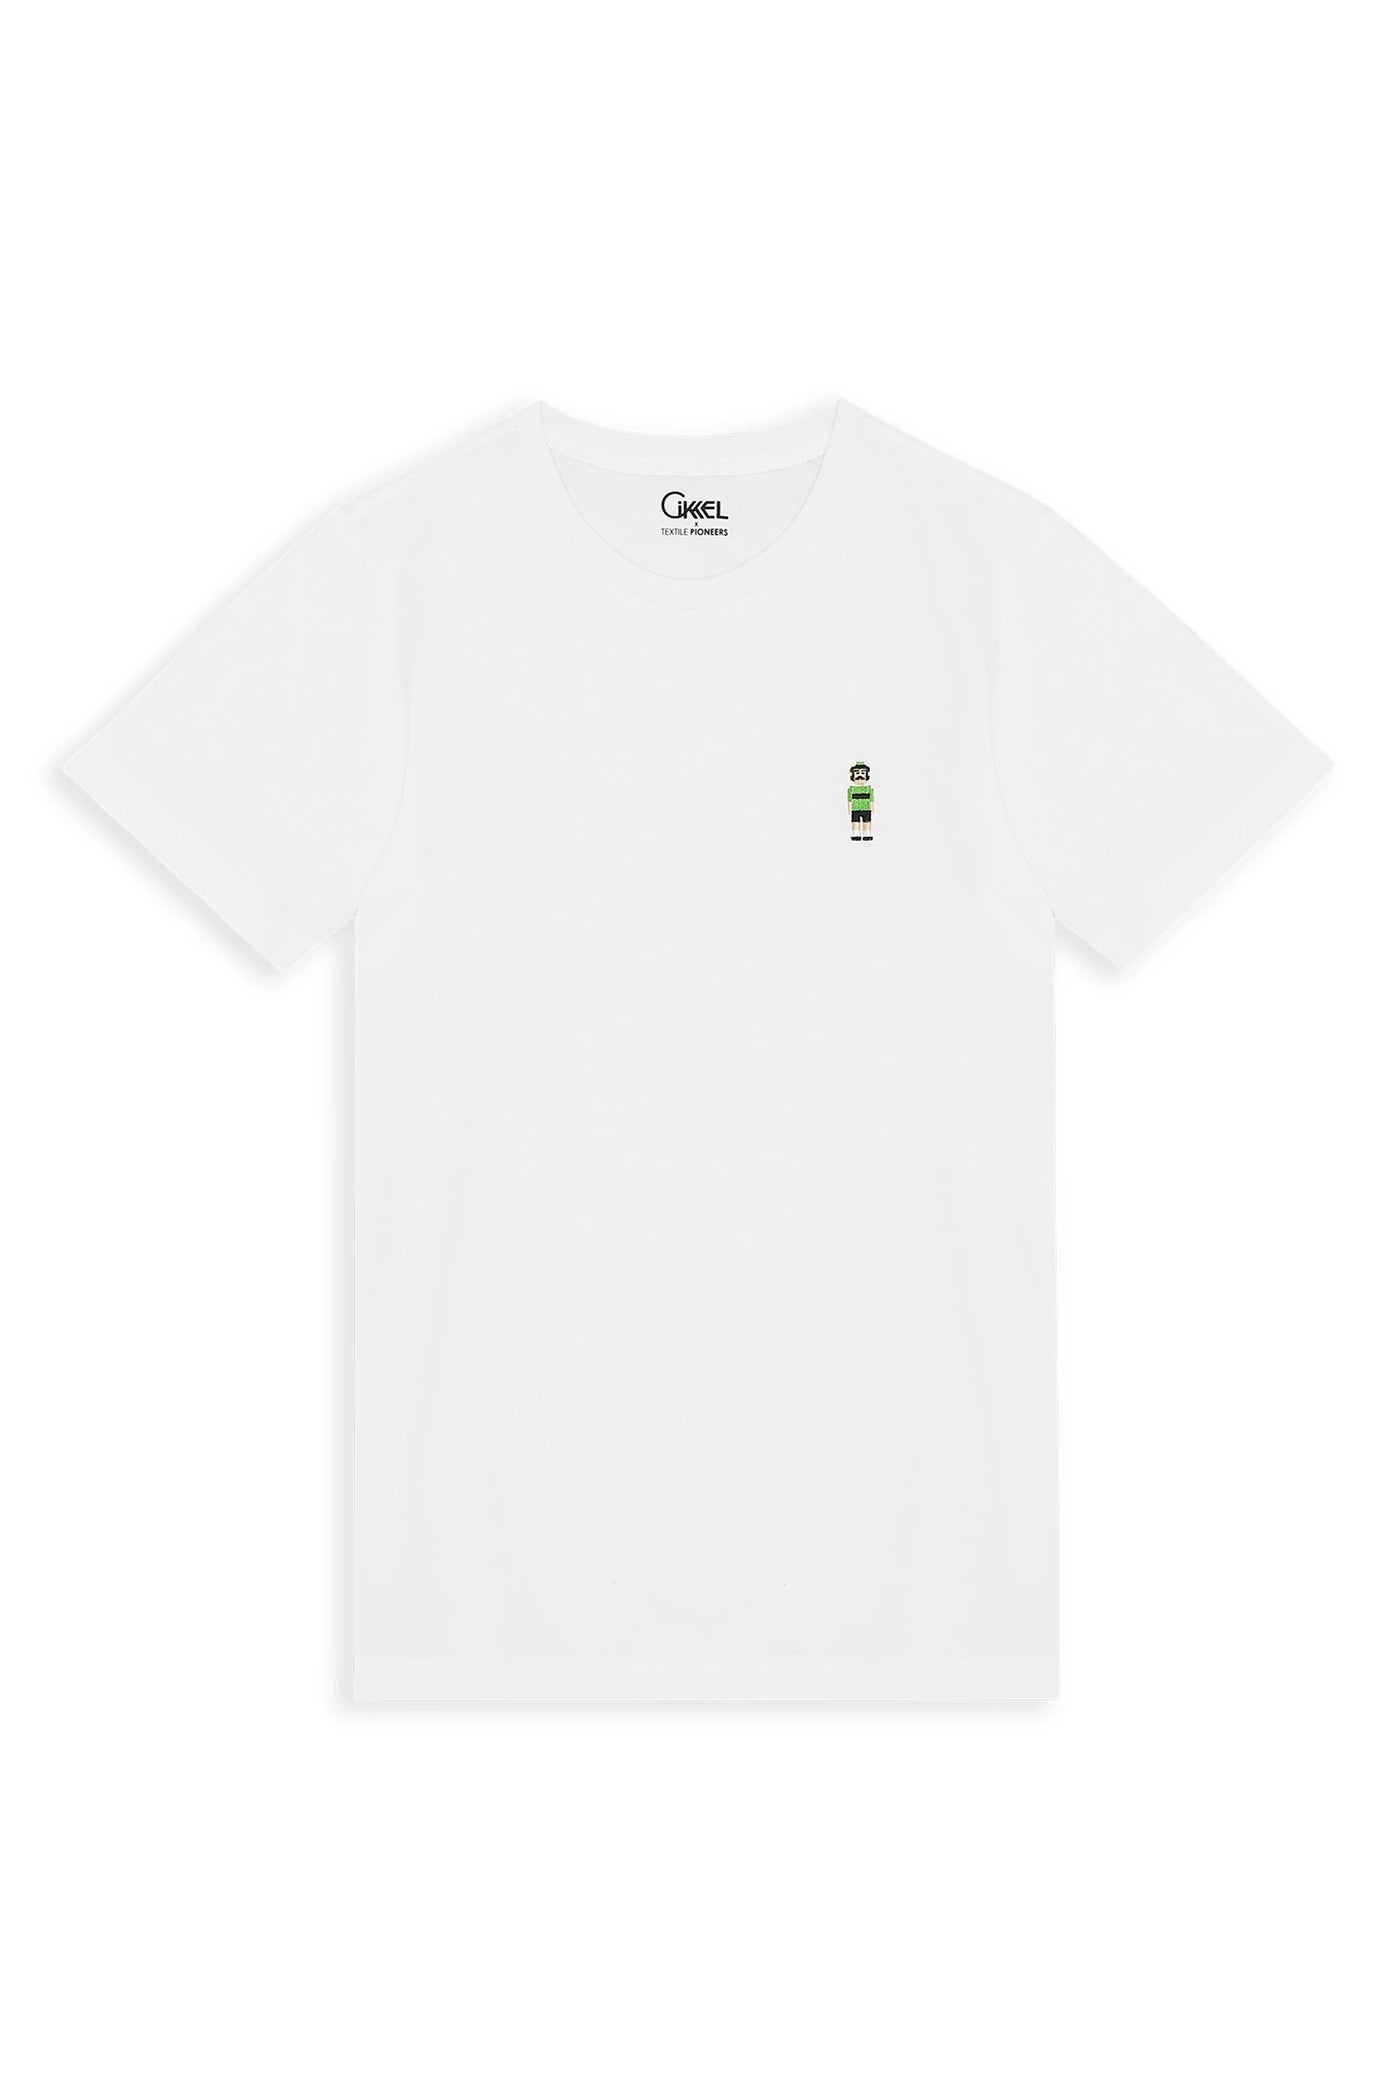 The Green Jersey tshirt